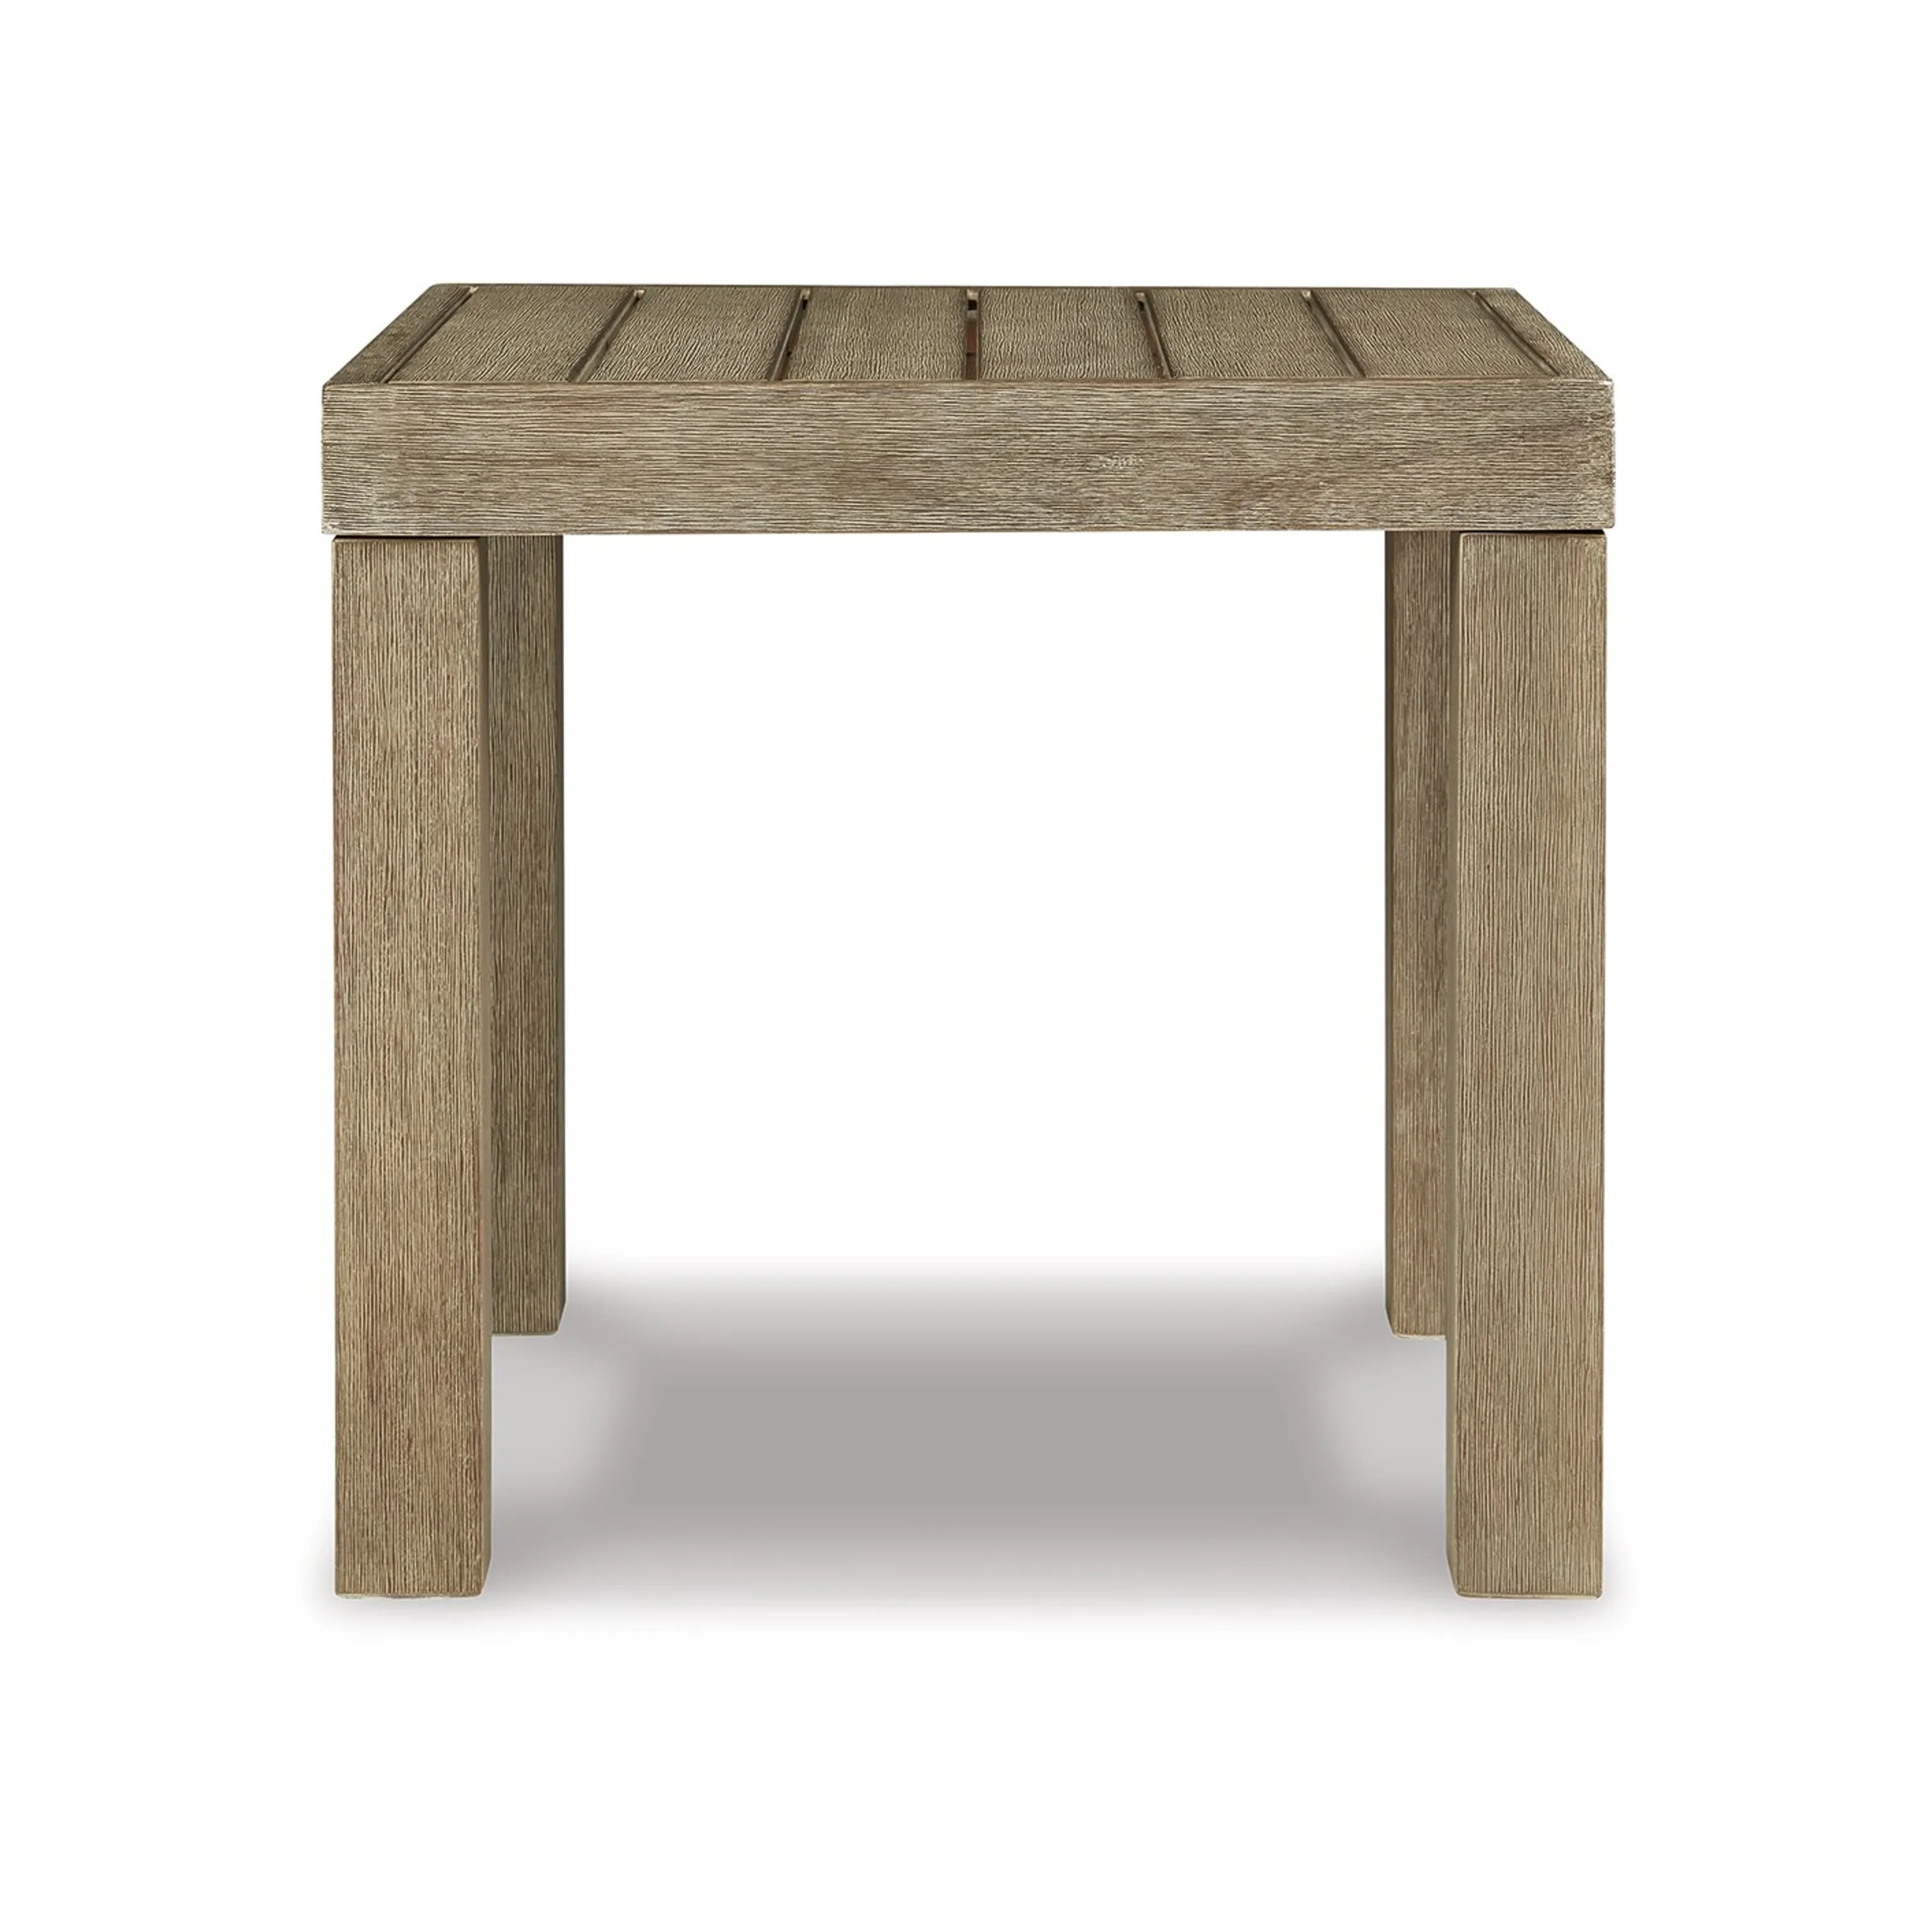 Fayi 22 Inch Outdoor End Table, Square Slatted Design, Natural Brown Finish - Benzara